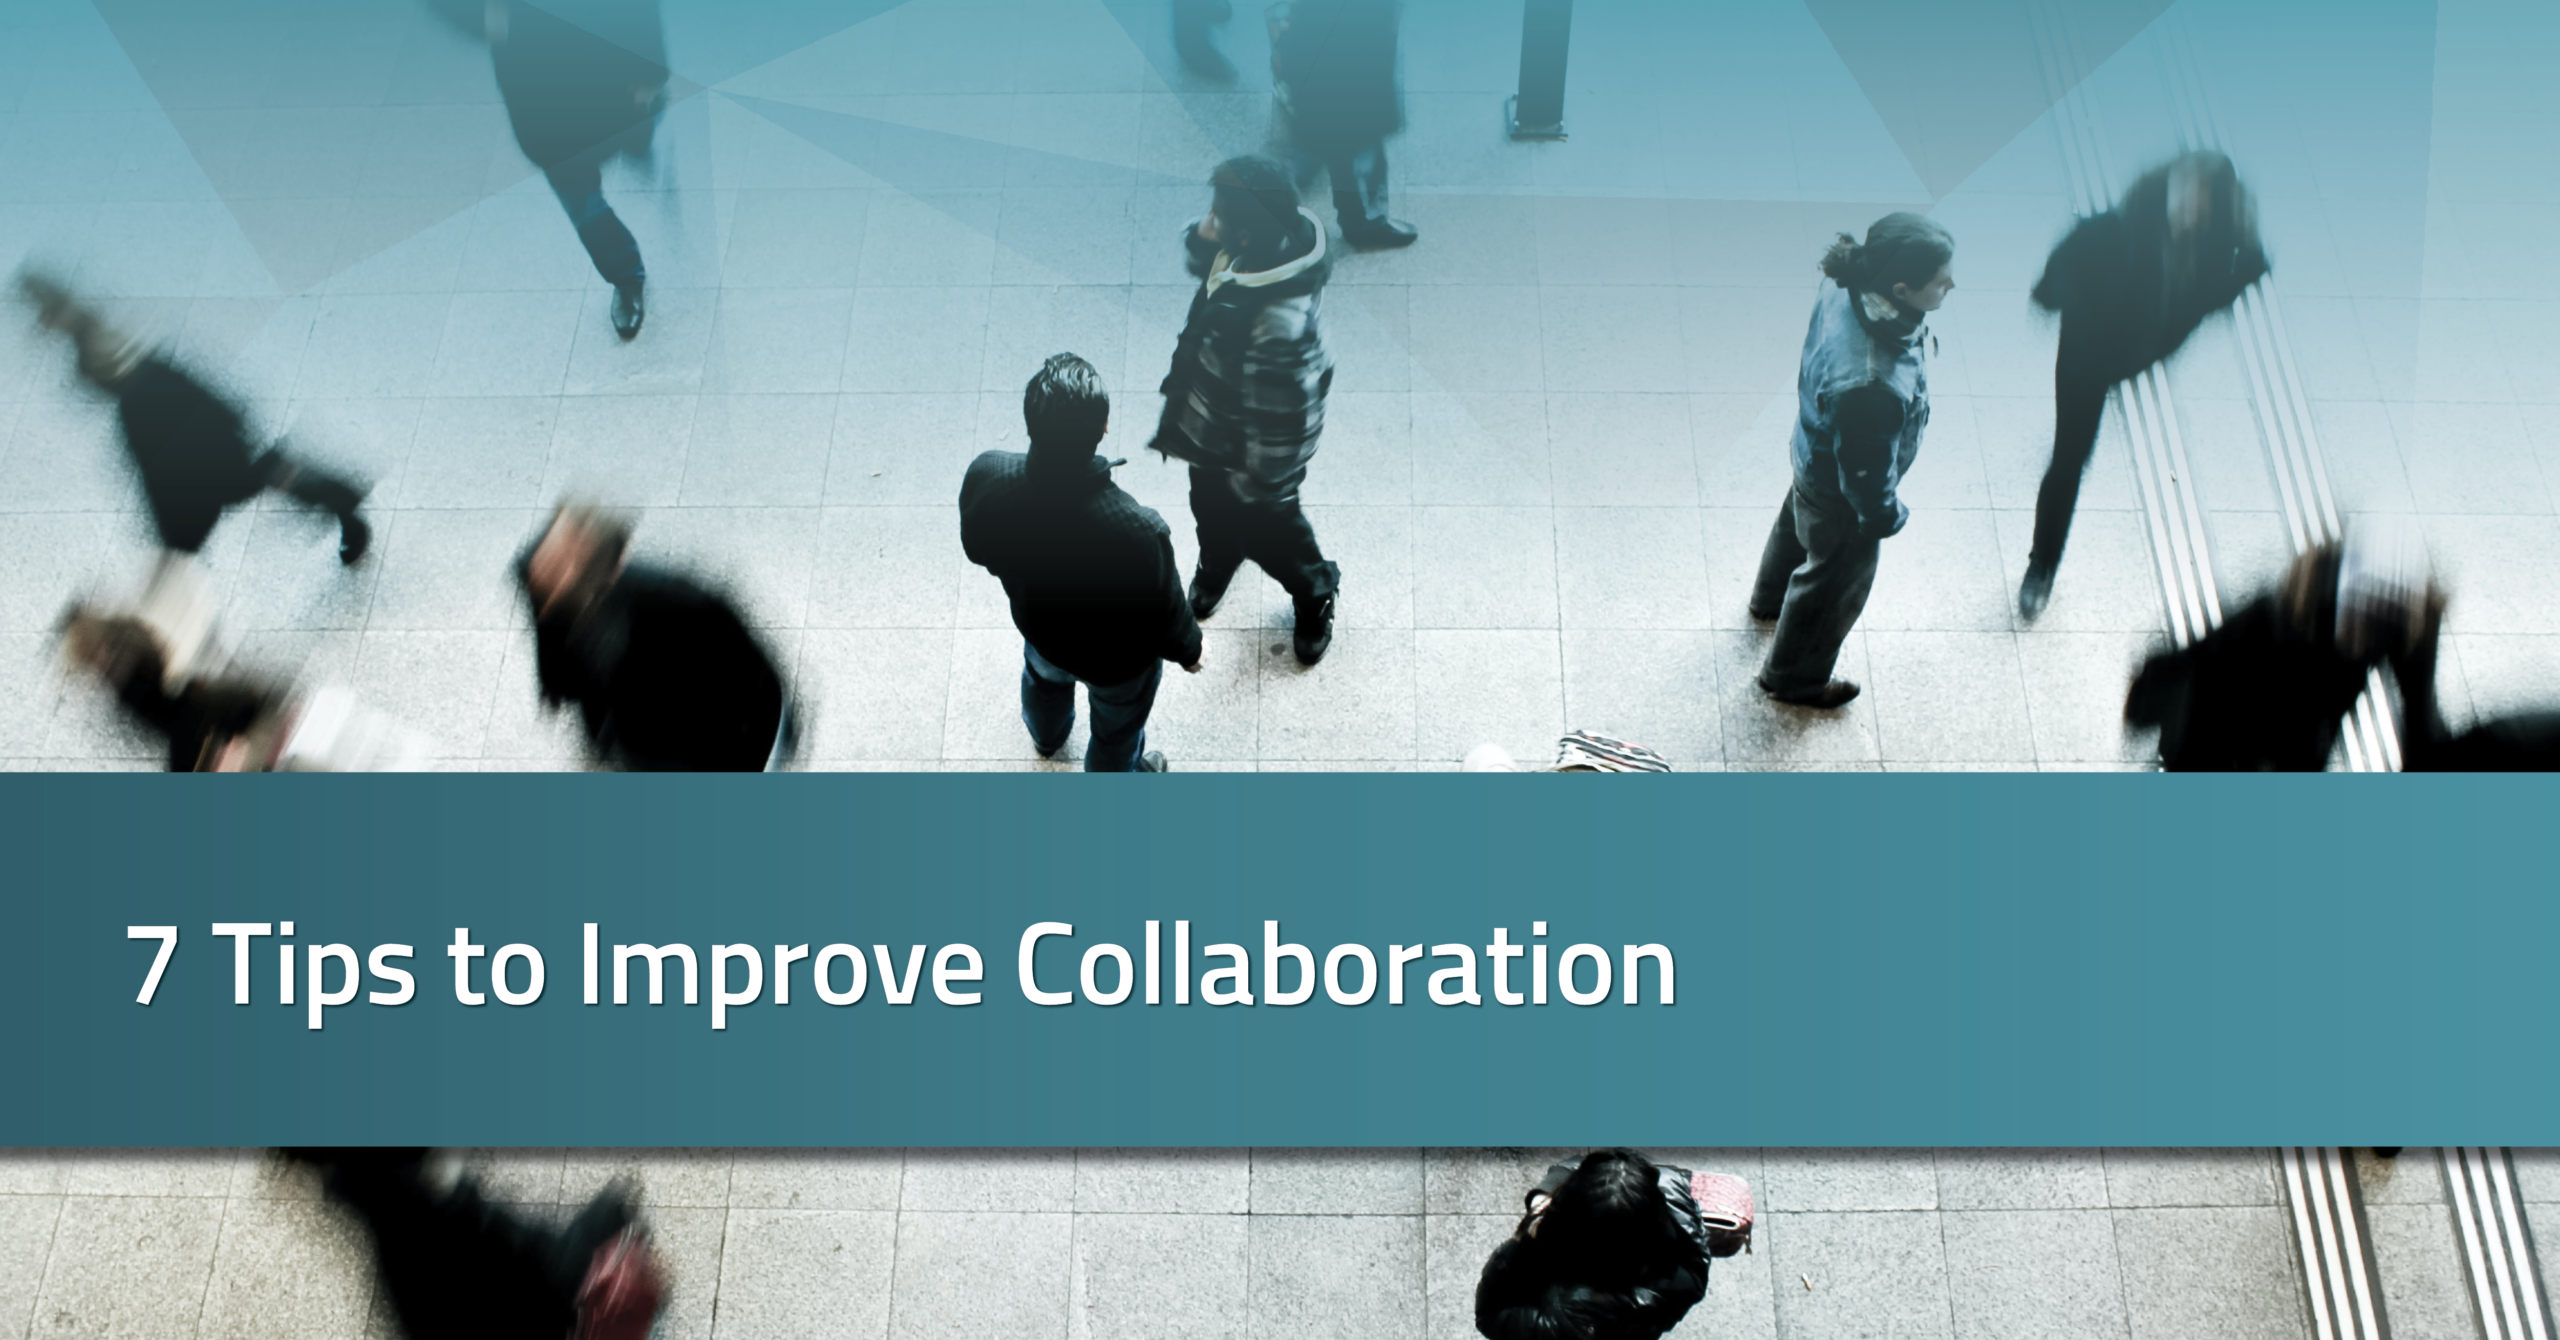 7 Tips to Improve Collaboration